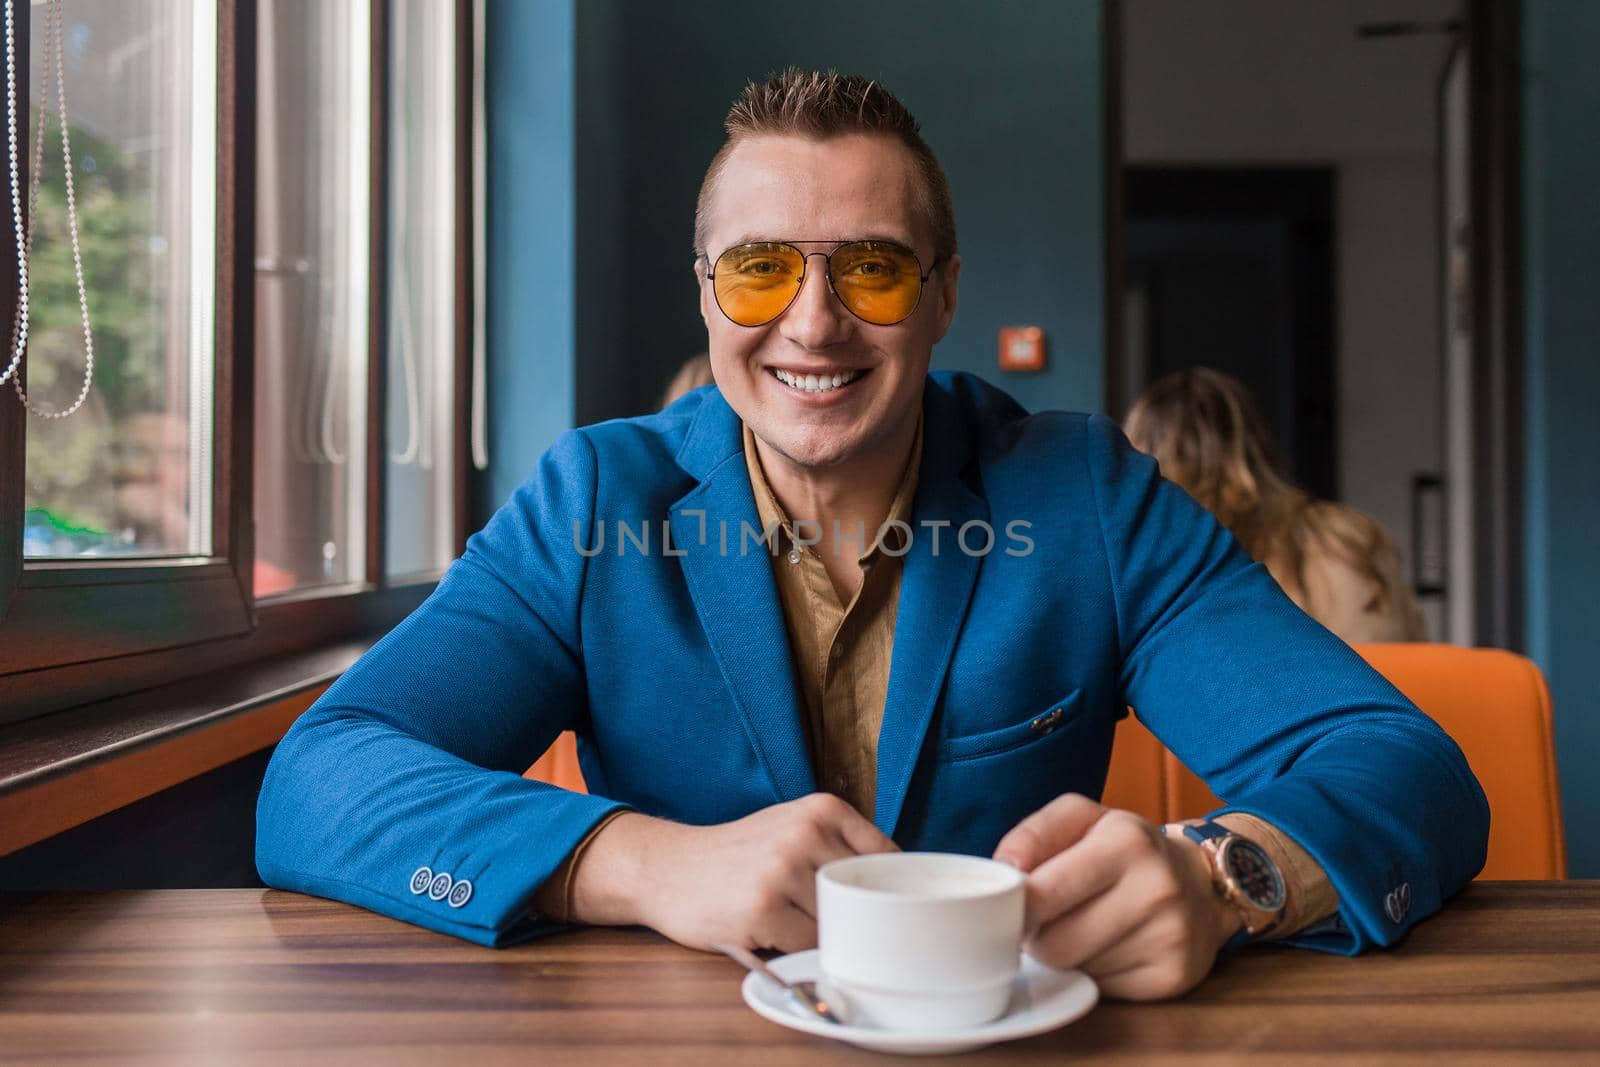 A positive smiling businessman a stylish portrait of Caucasian appearance in sunglasses, blue jacket and brown shirt, sits at a table on a coffee break and looks at camera in a cafe background.